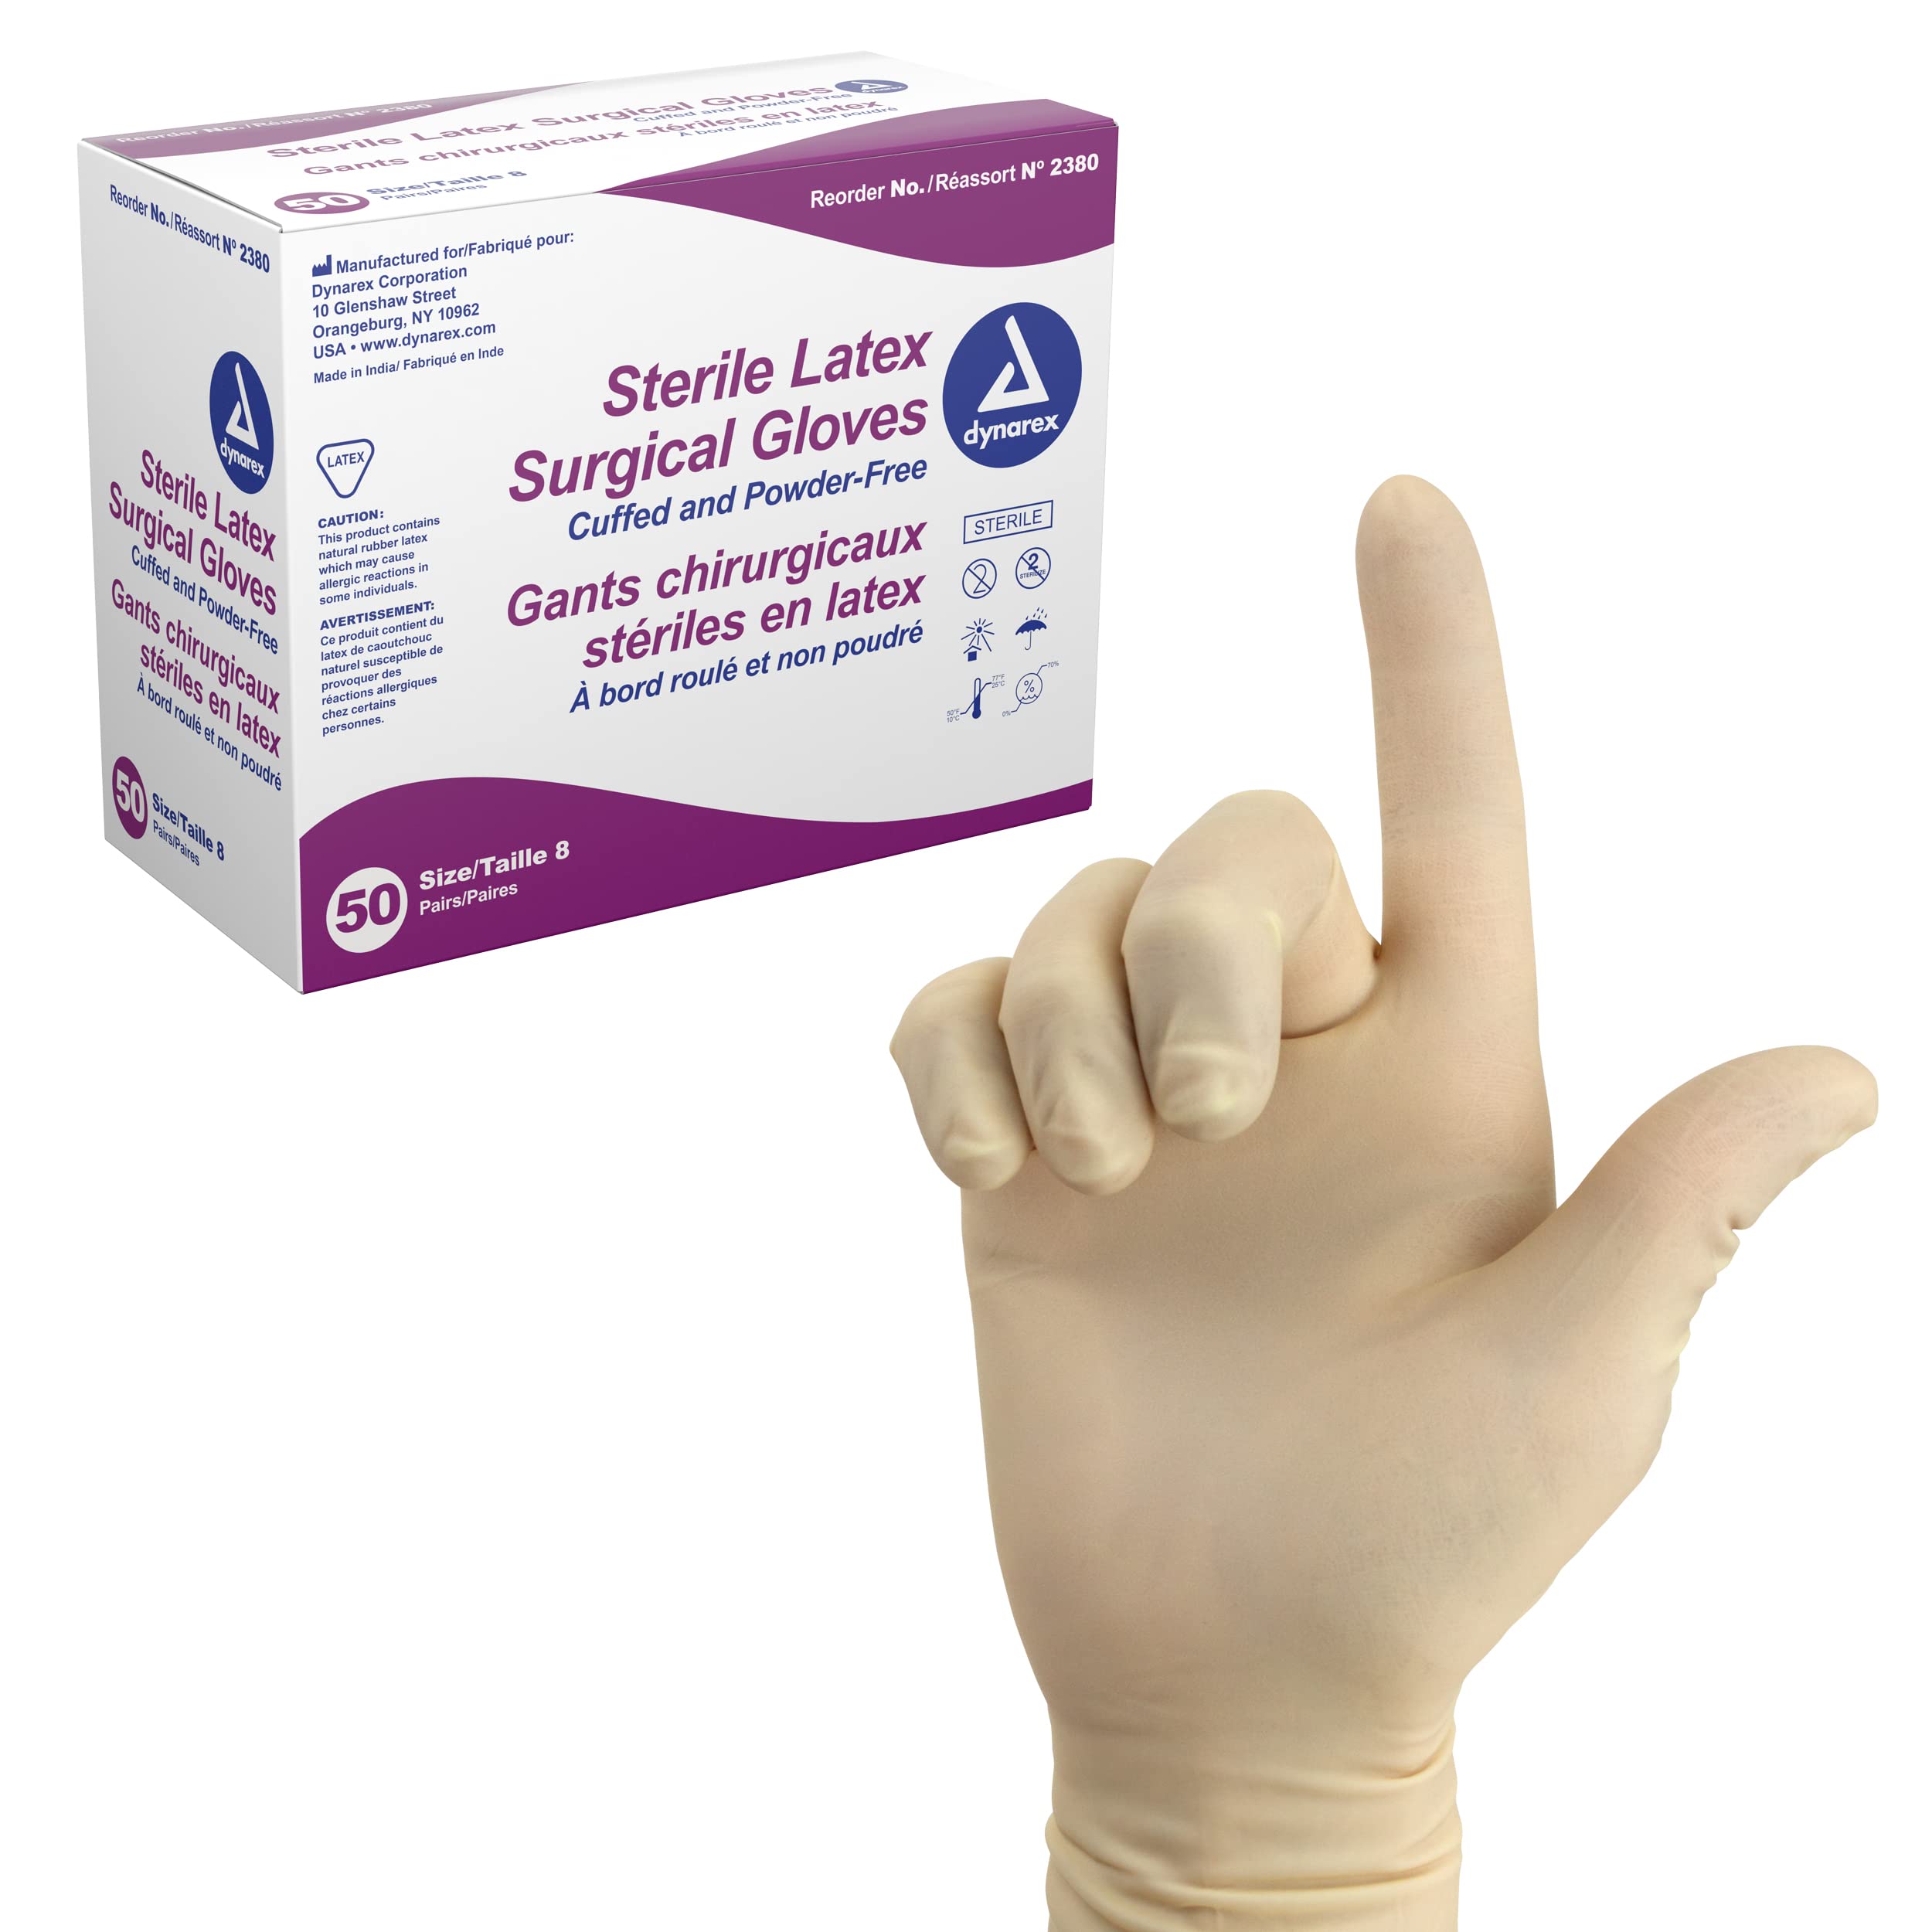 Dynarex Sterile Latex Surgical Gloves Size 8 & Powder-Free Offers Superior  Protection & Comfort for